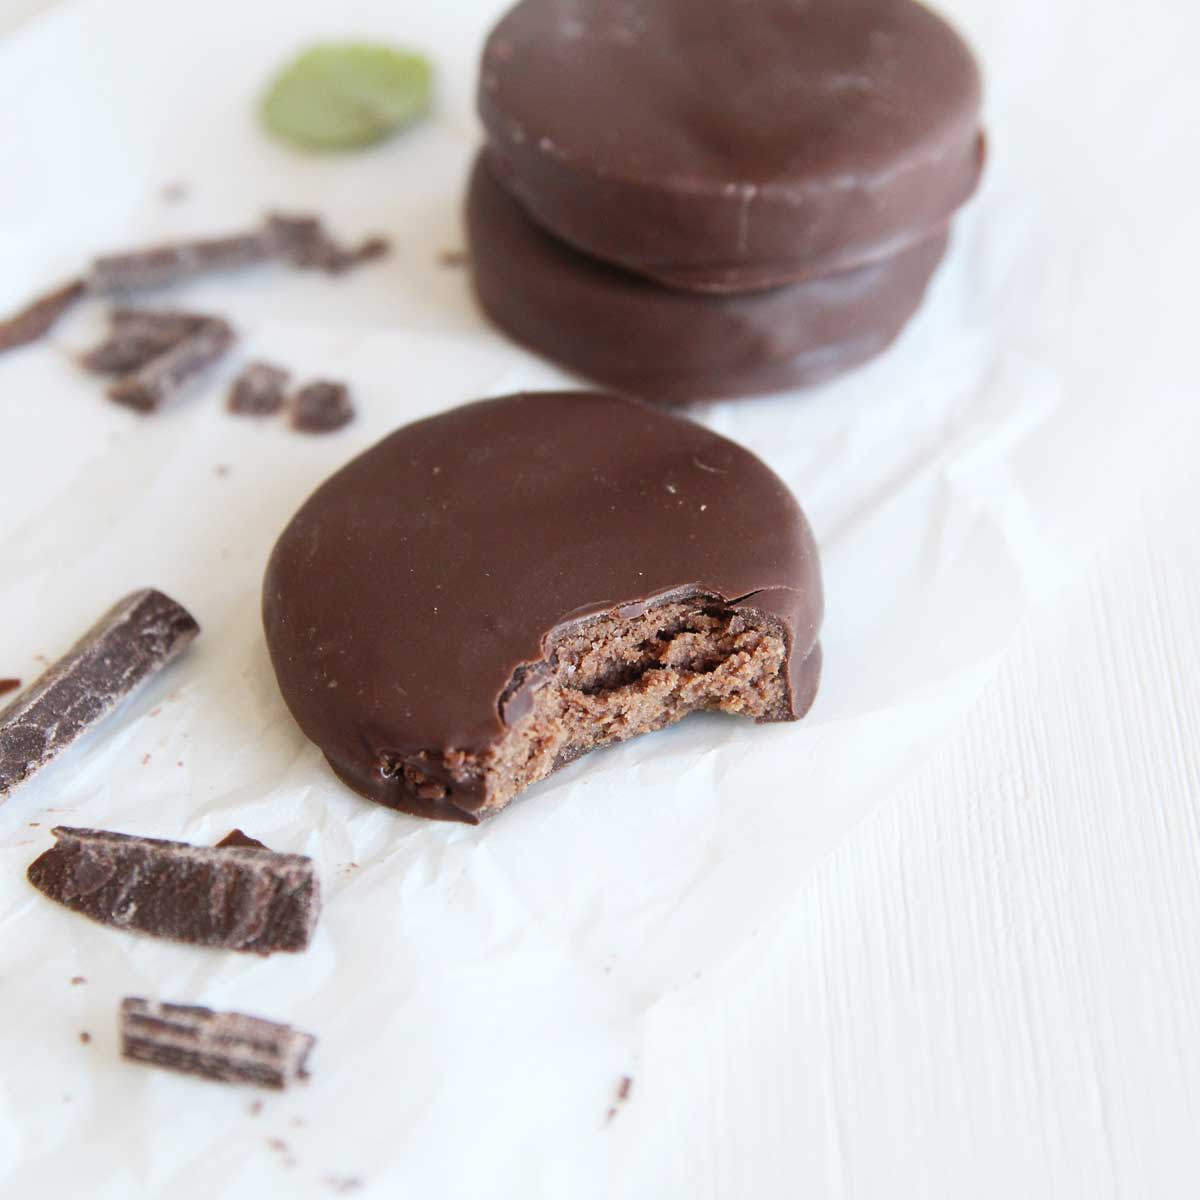 Homemade Protein Mint Thins (Easy, No-Bake Recipe) - Almond Joy Protein Bars